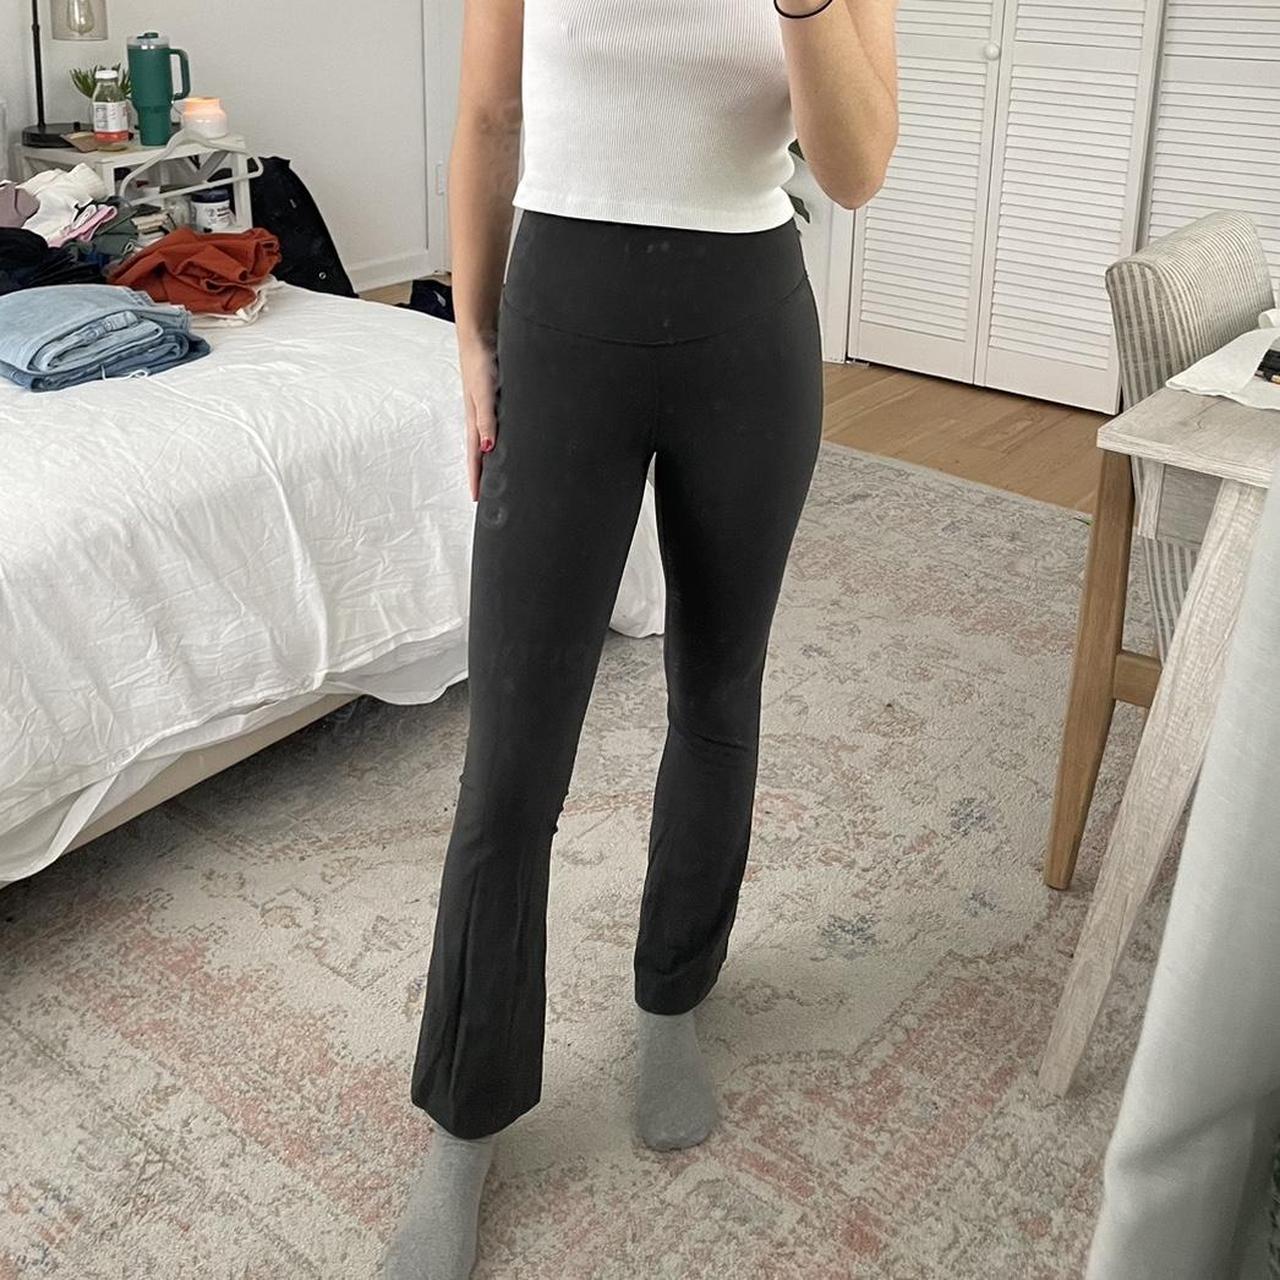 Size 0 Align Leggings on A Size 2